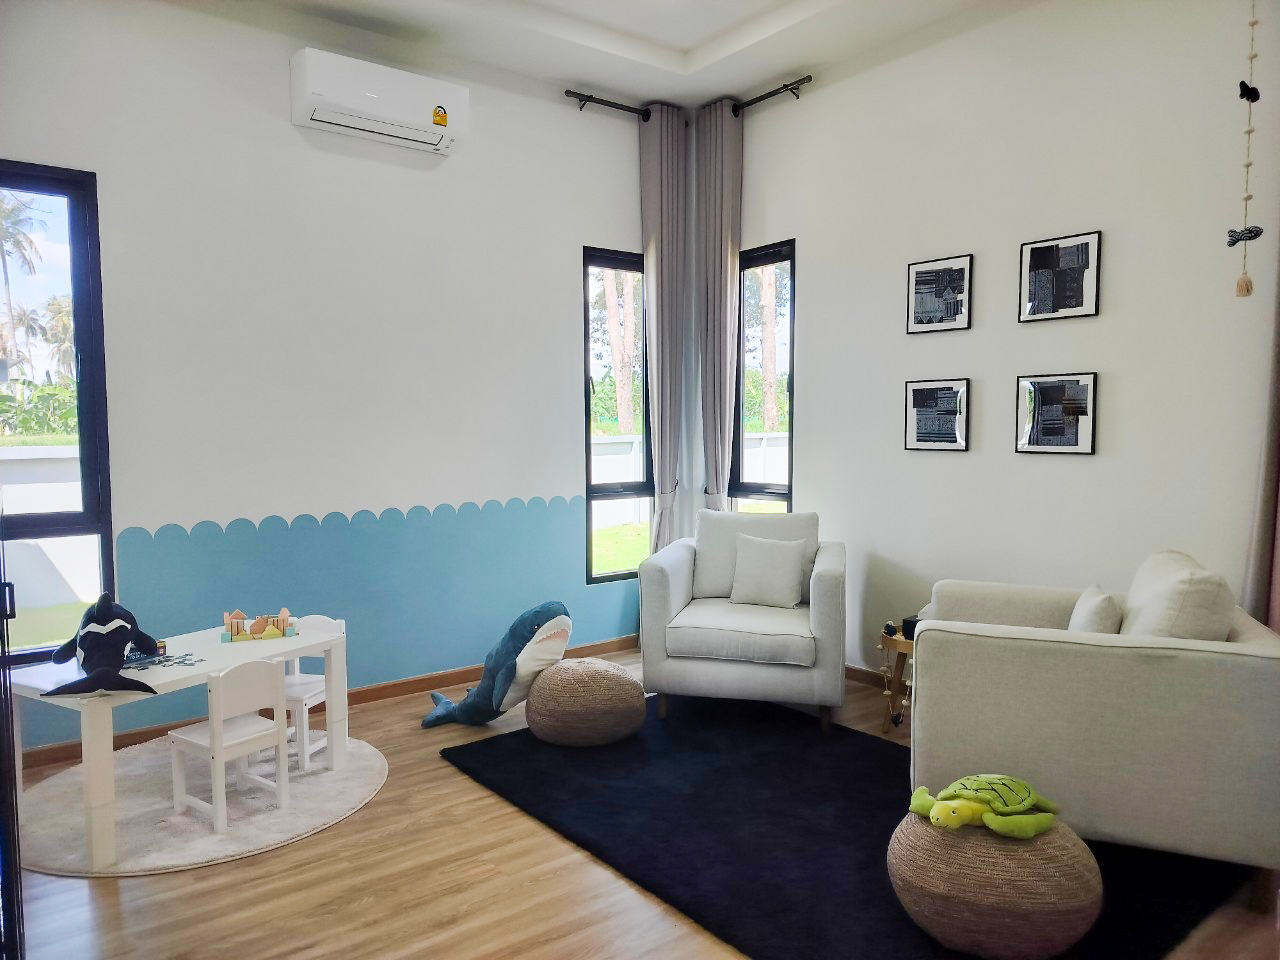 A21 Thailand Child Advocacy Center Aftercare Space (2)